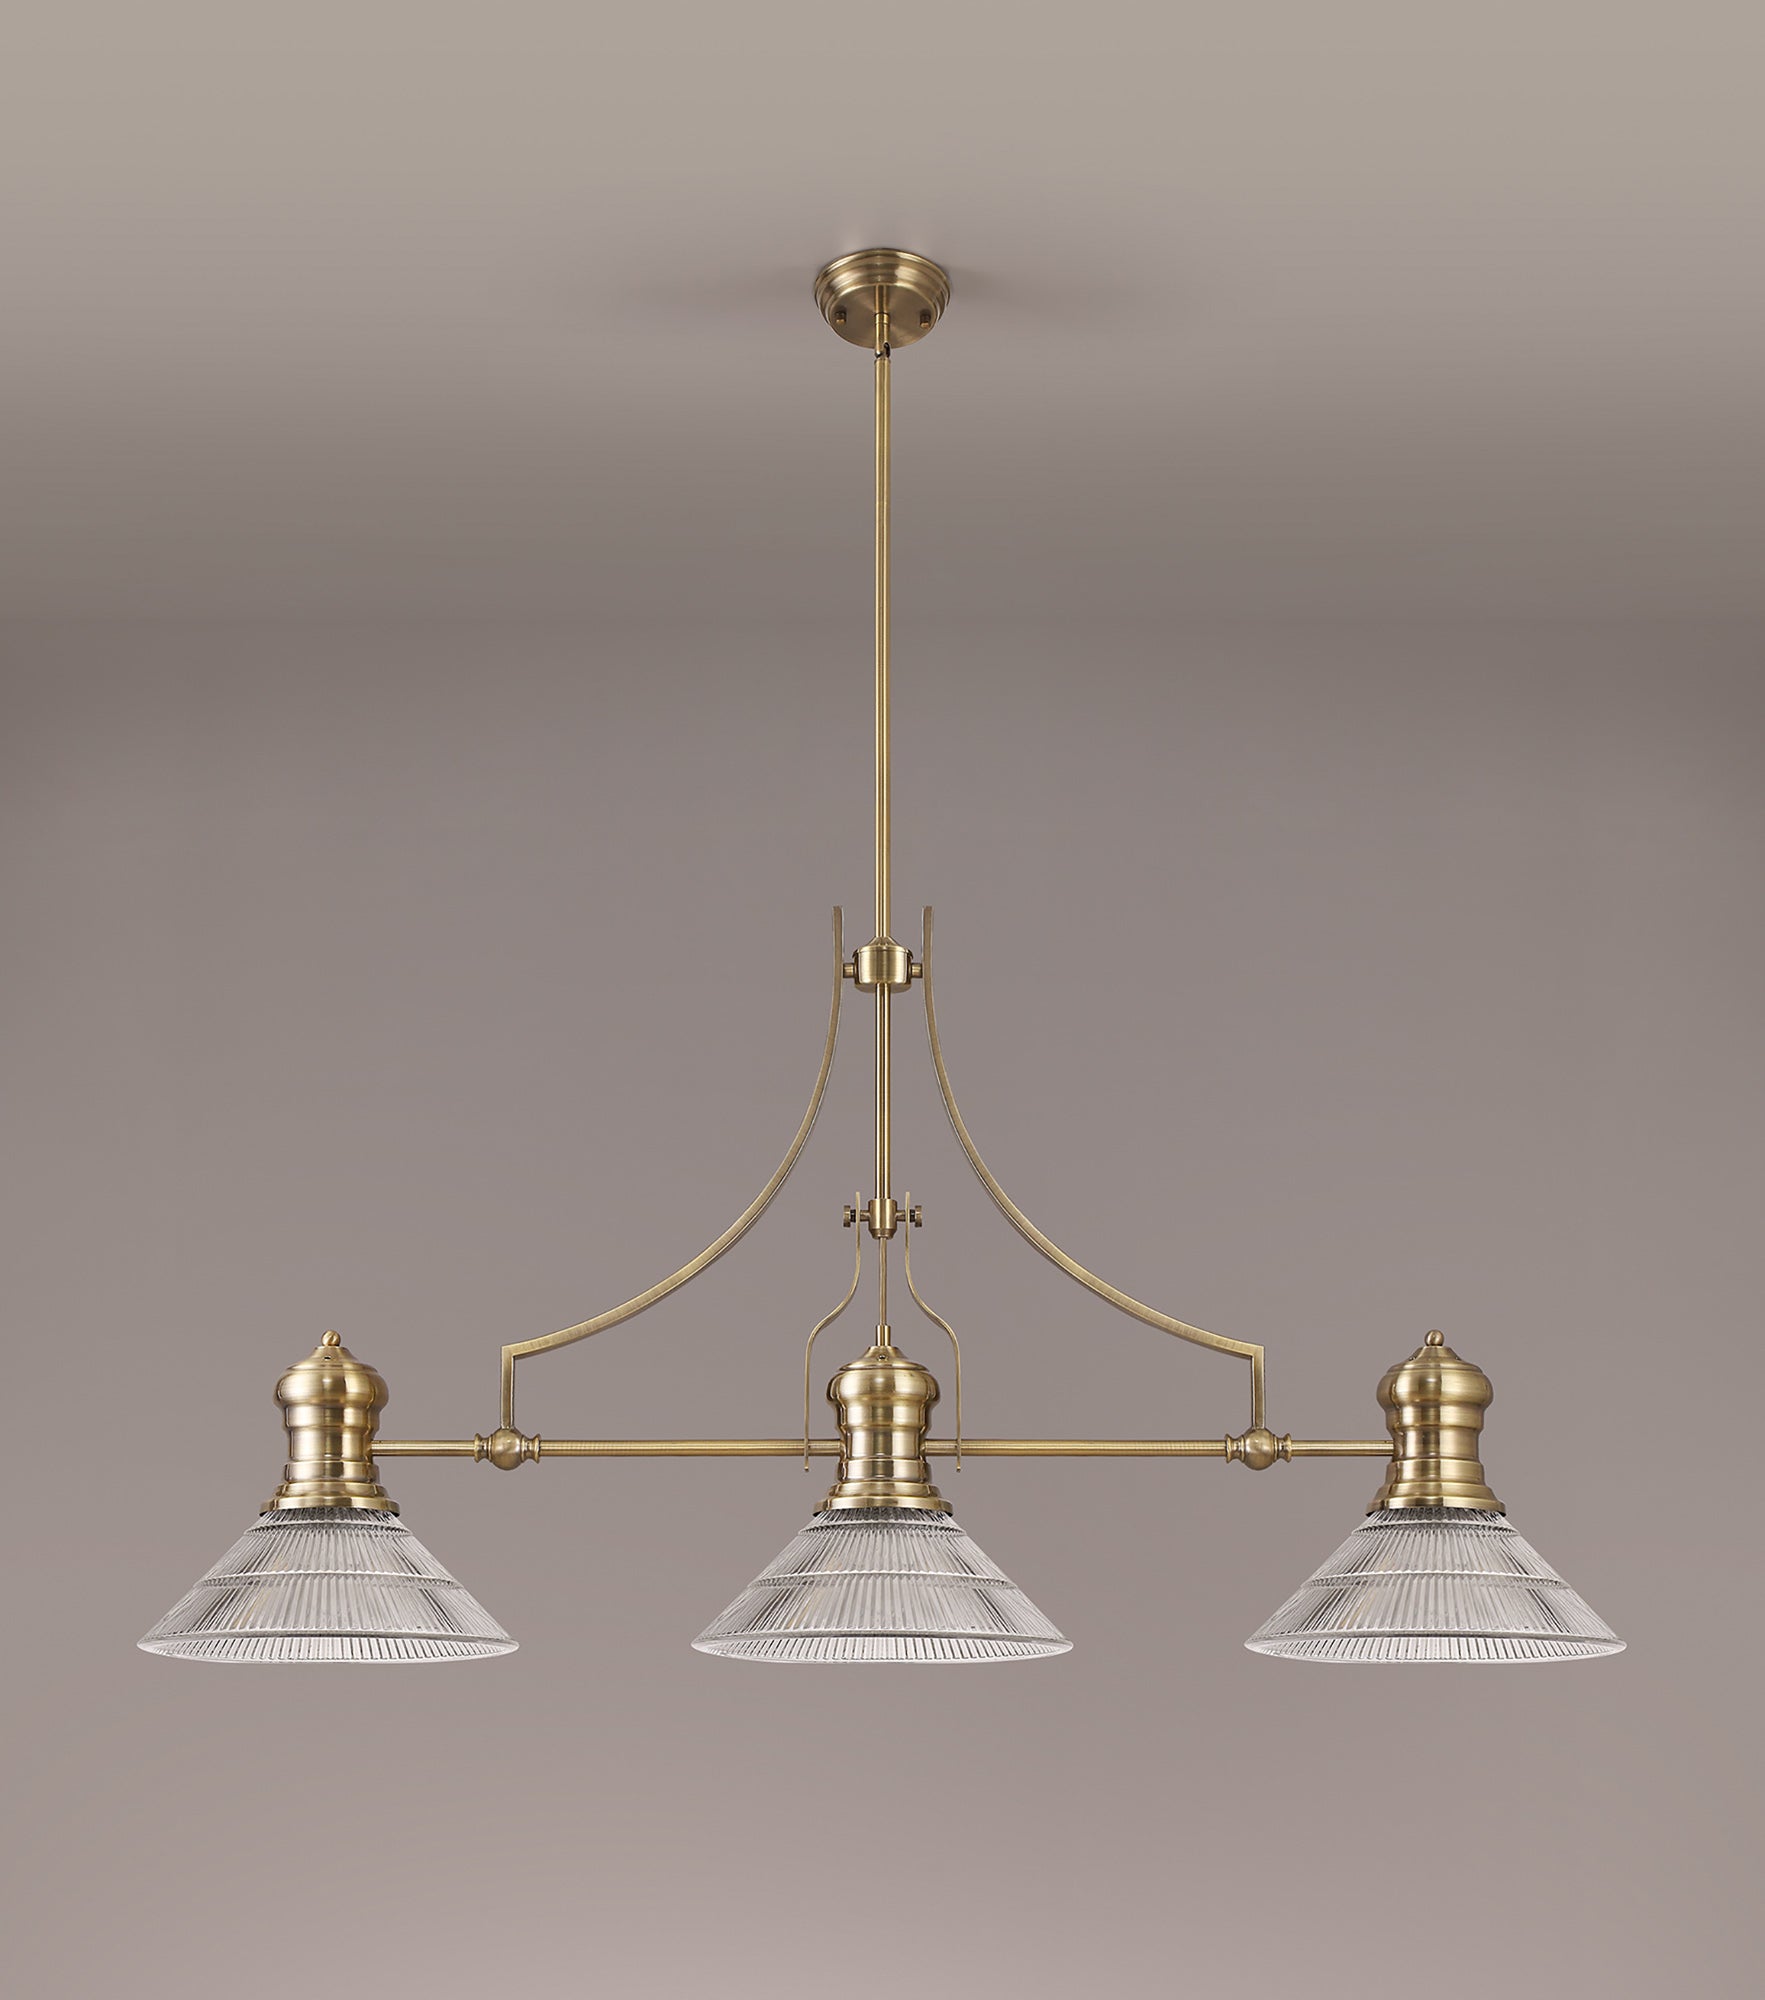 Docker 3 Light Linear Pendant E27 With 30cm Cone Glass Shade, Antique Brass, Clear